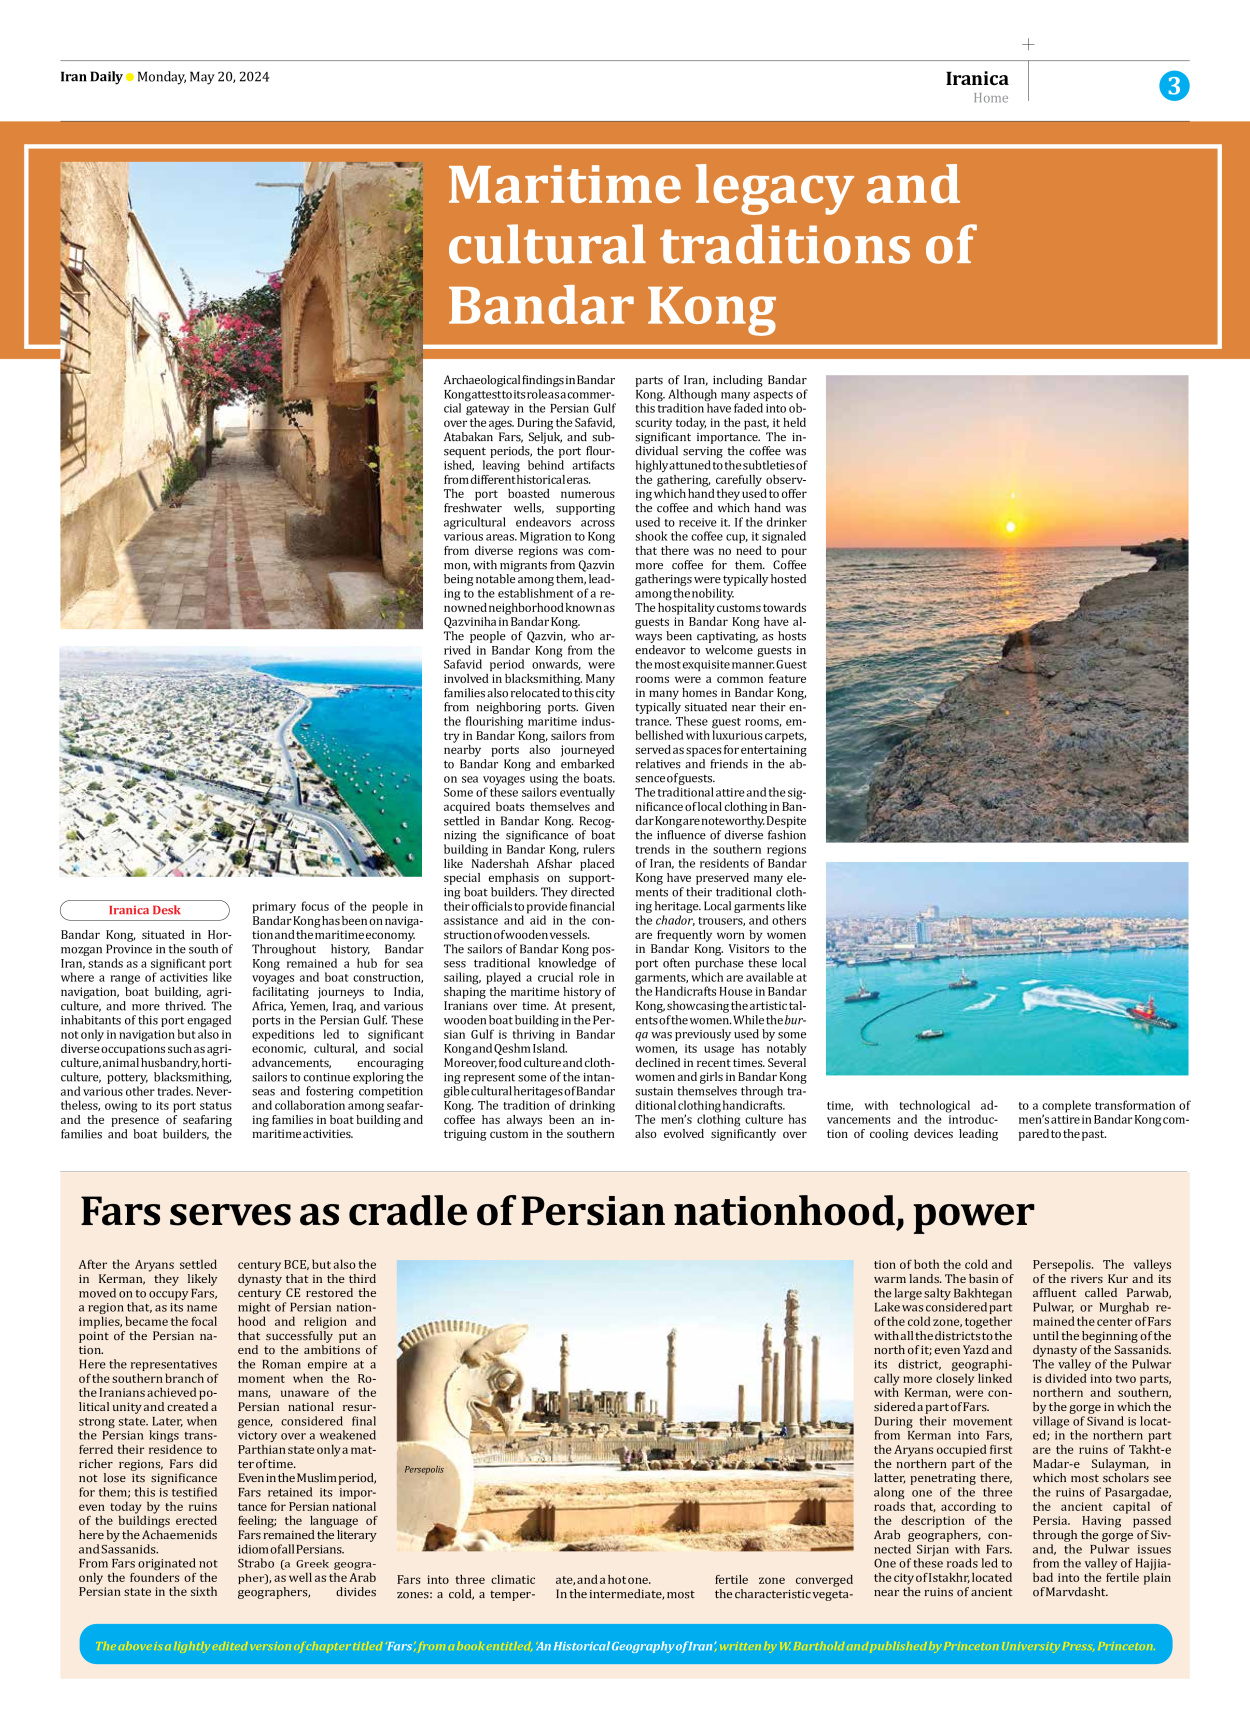 Iran Daily - Number Seven Thousand Five Hundred and Sixty Two - 19 May 2024 - Page 3